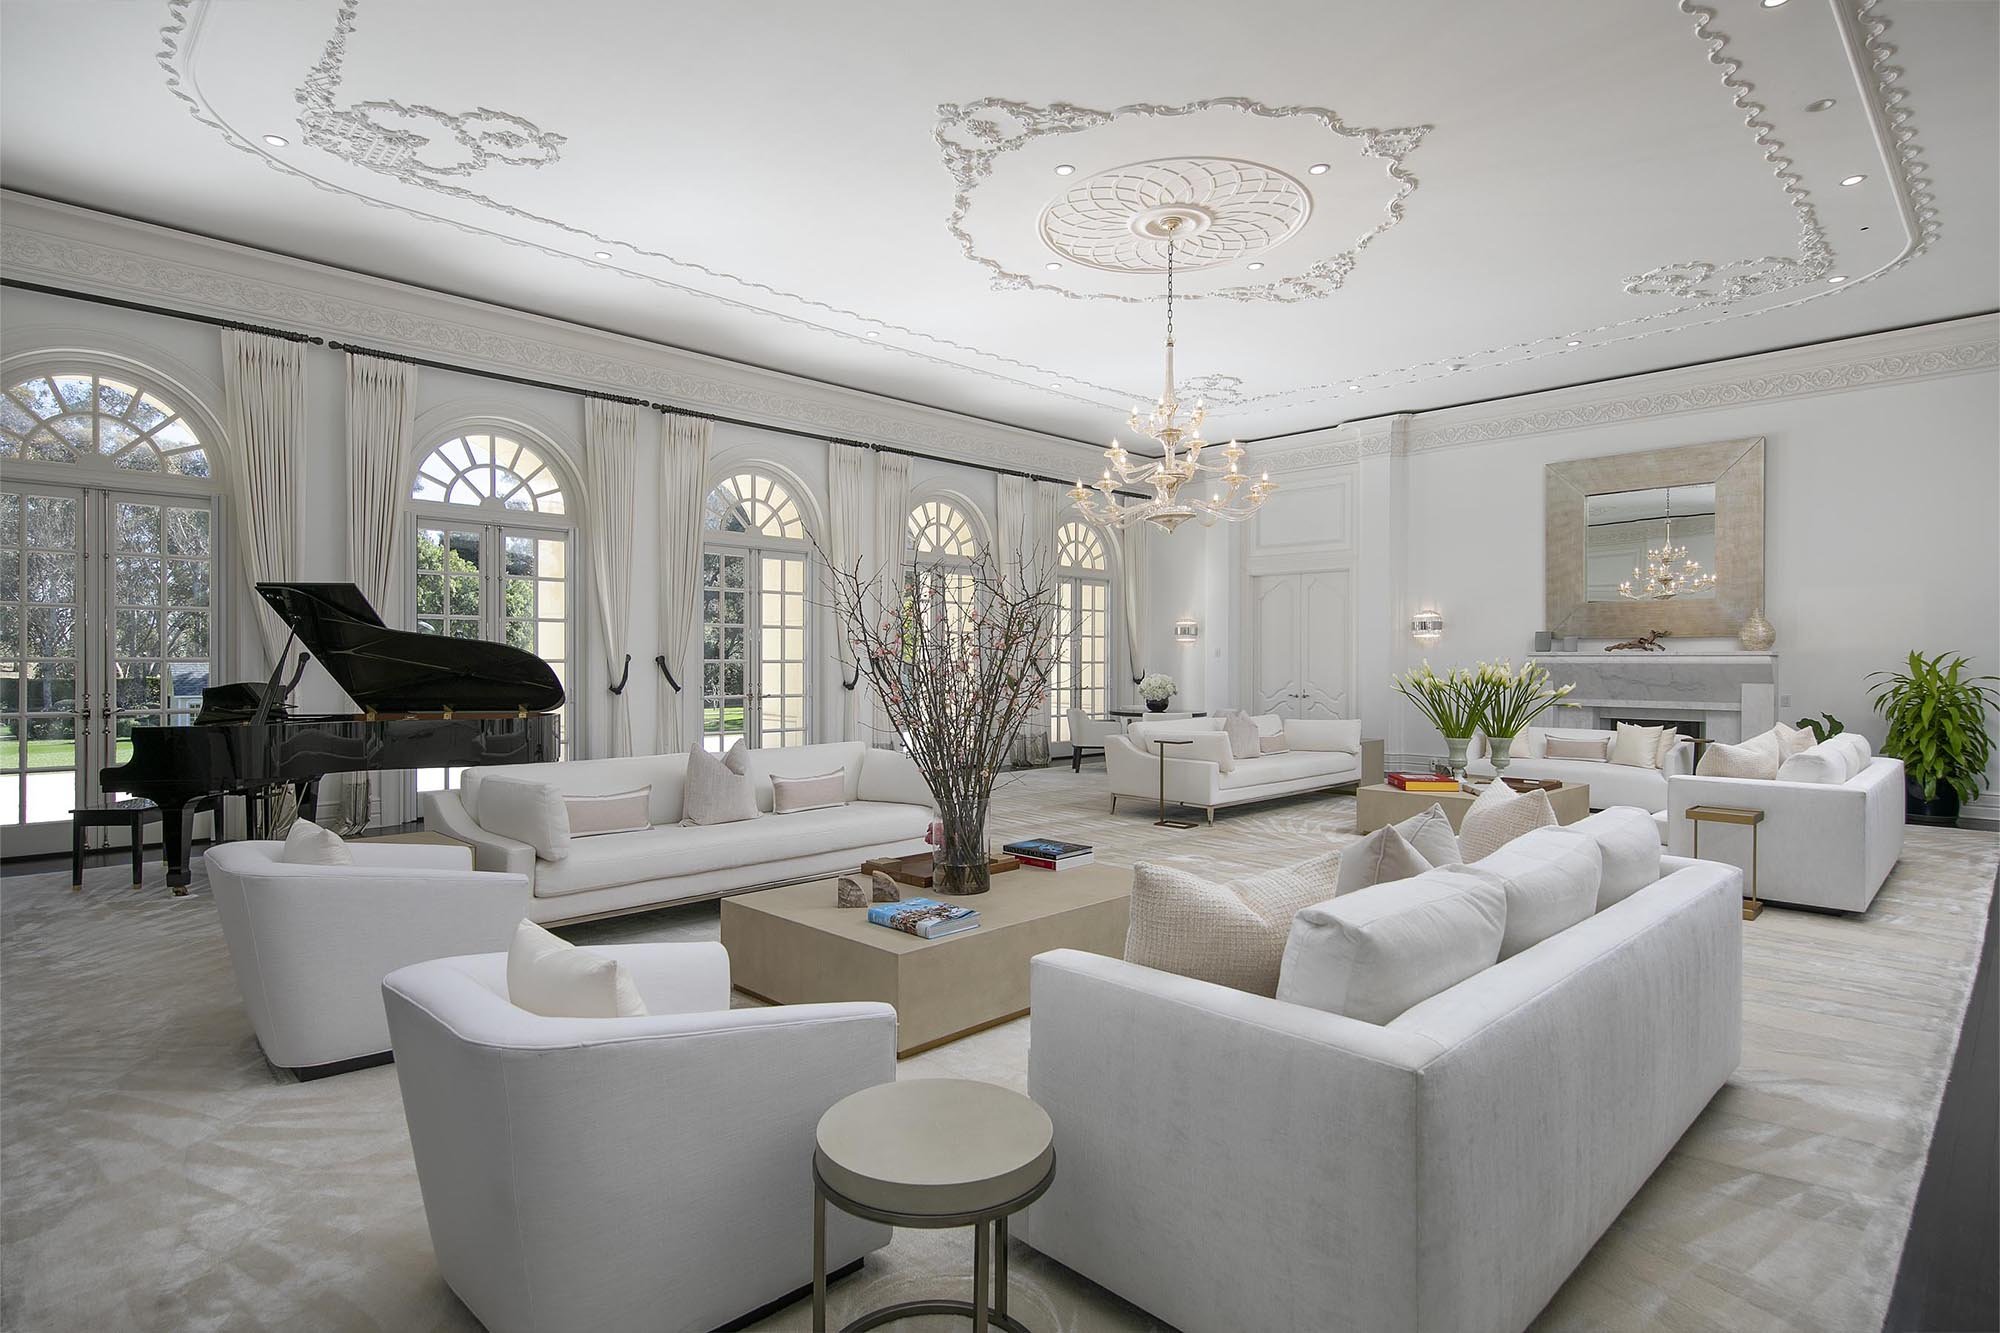 Francis York The 'Spelling Manor' is Back on the Market for $165M 10.jpg